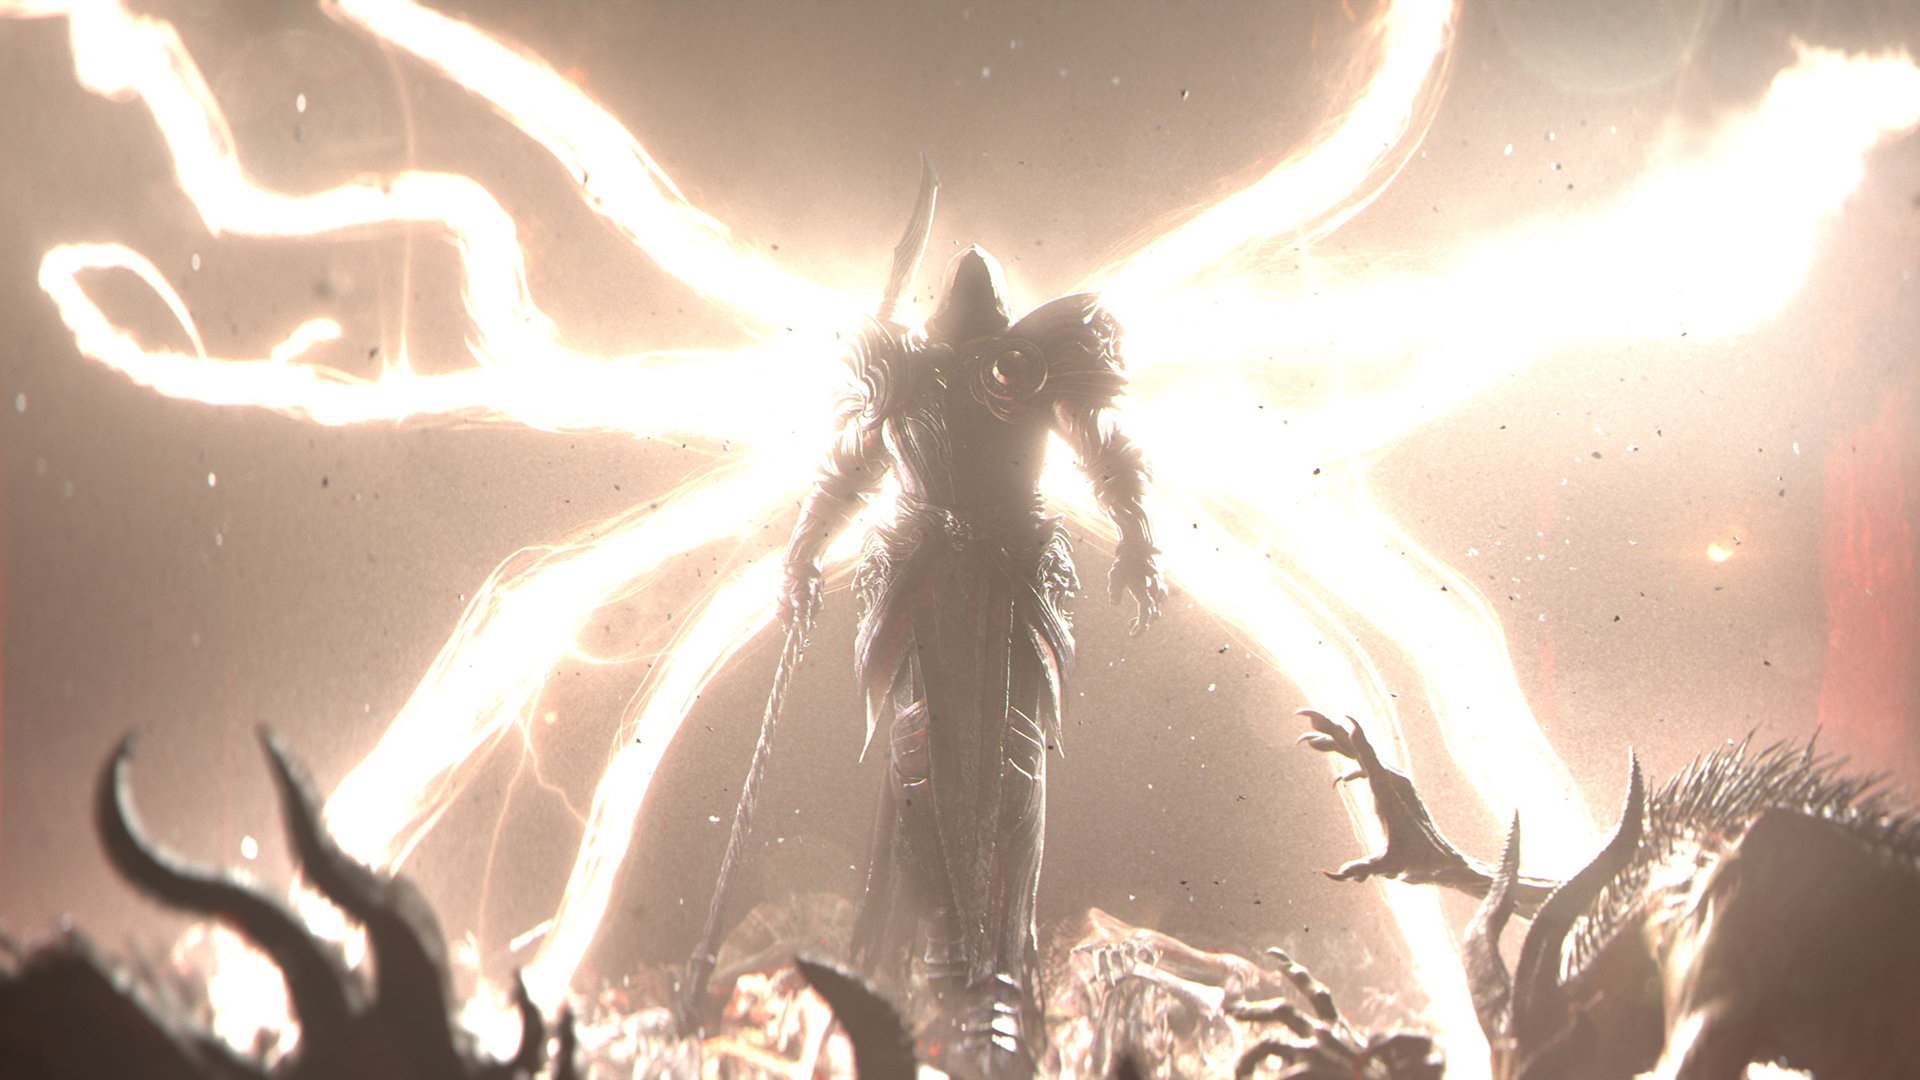 A faceless armored angel with glowing, tendril-like wings blinds a group of demons below it in artwork from Diablo 4